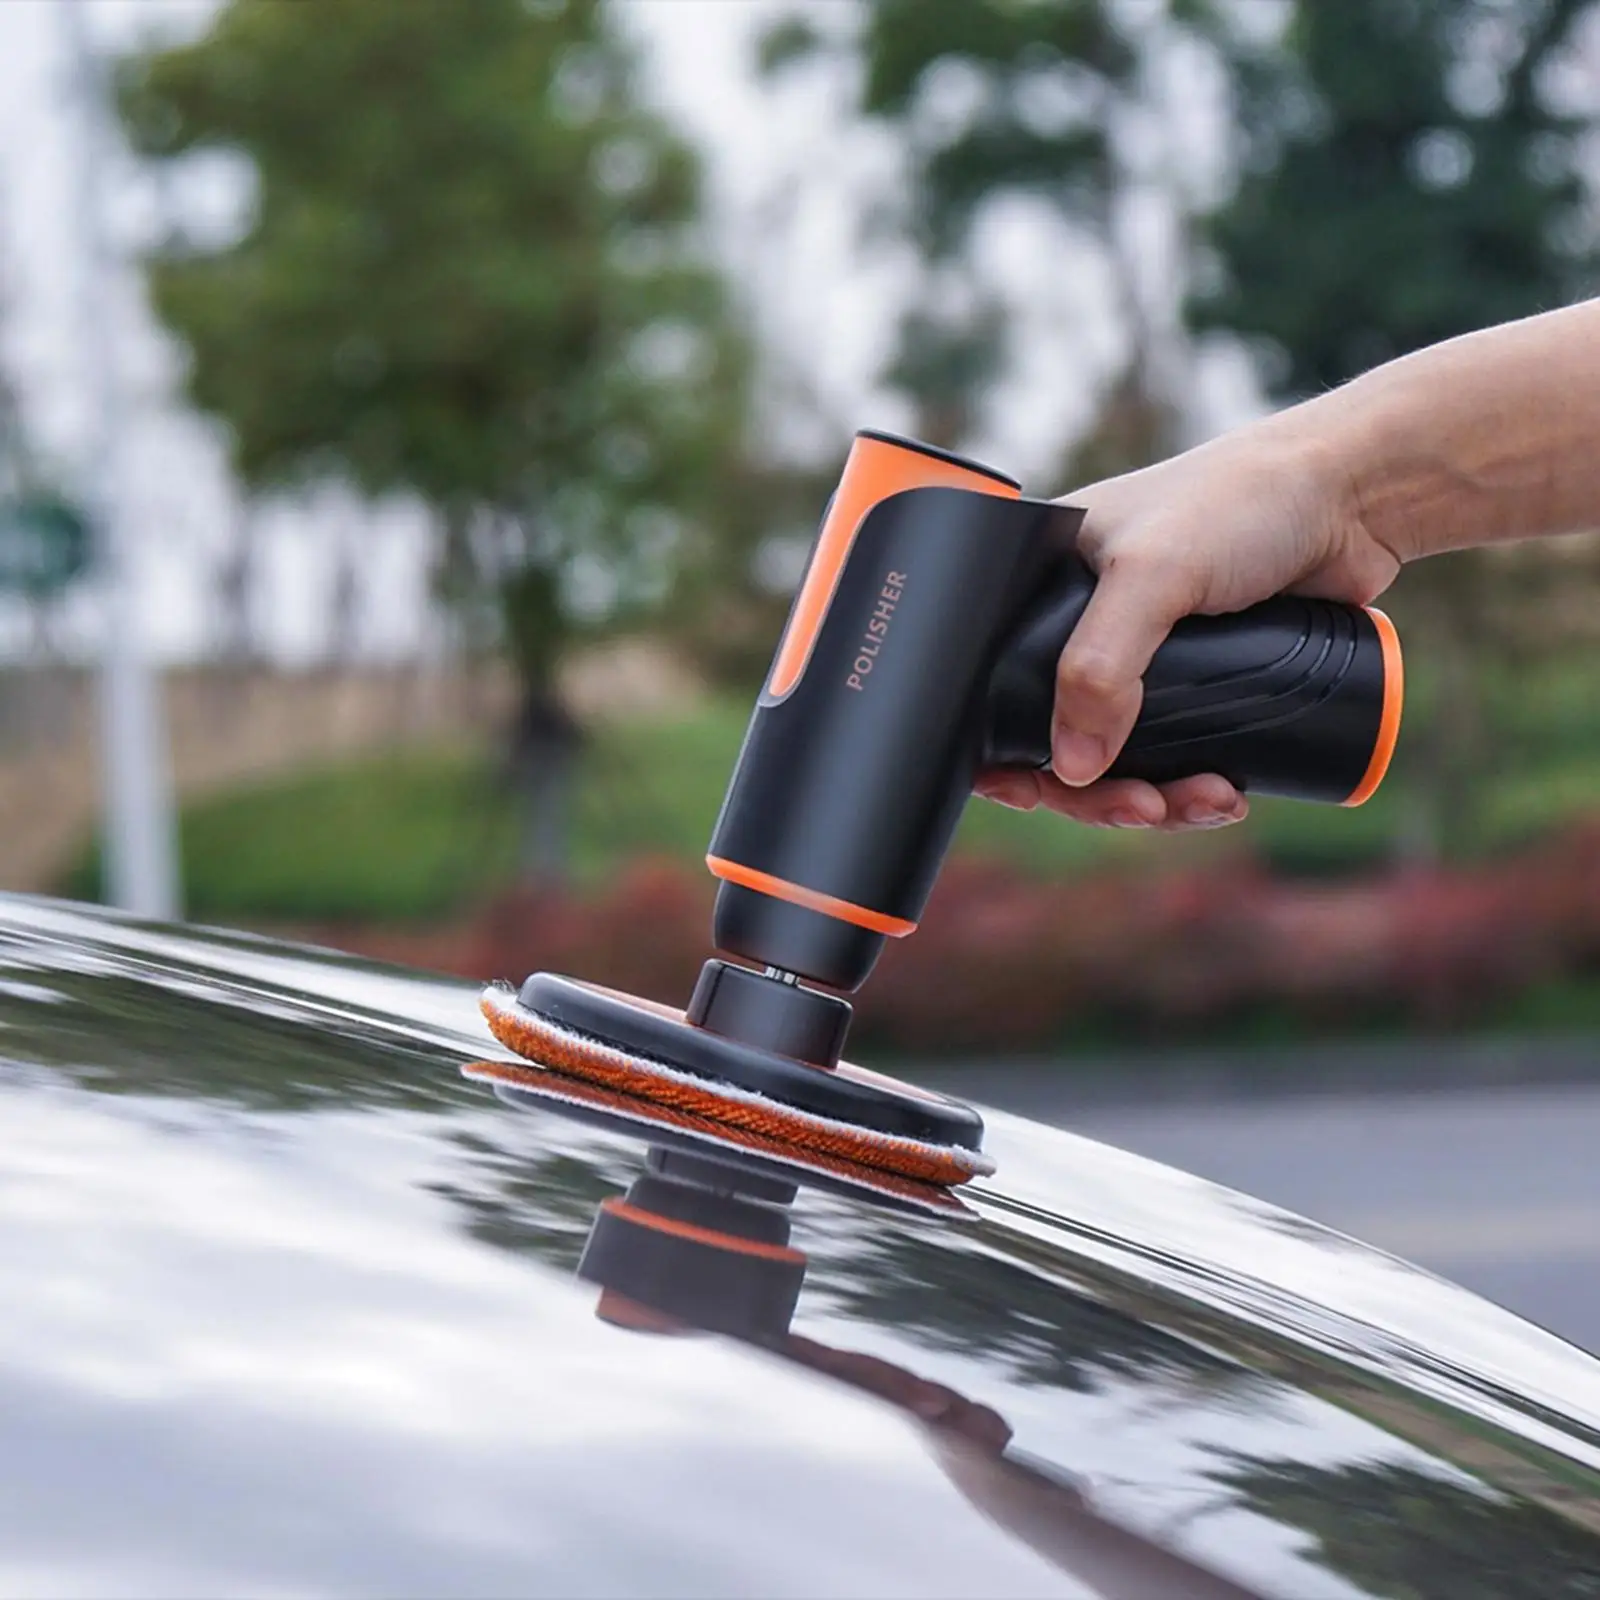 Cordless Car Buffer Polisher Rechargeable with 2x2000 MAh Battery Portable